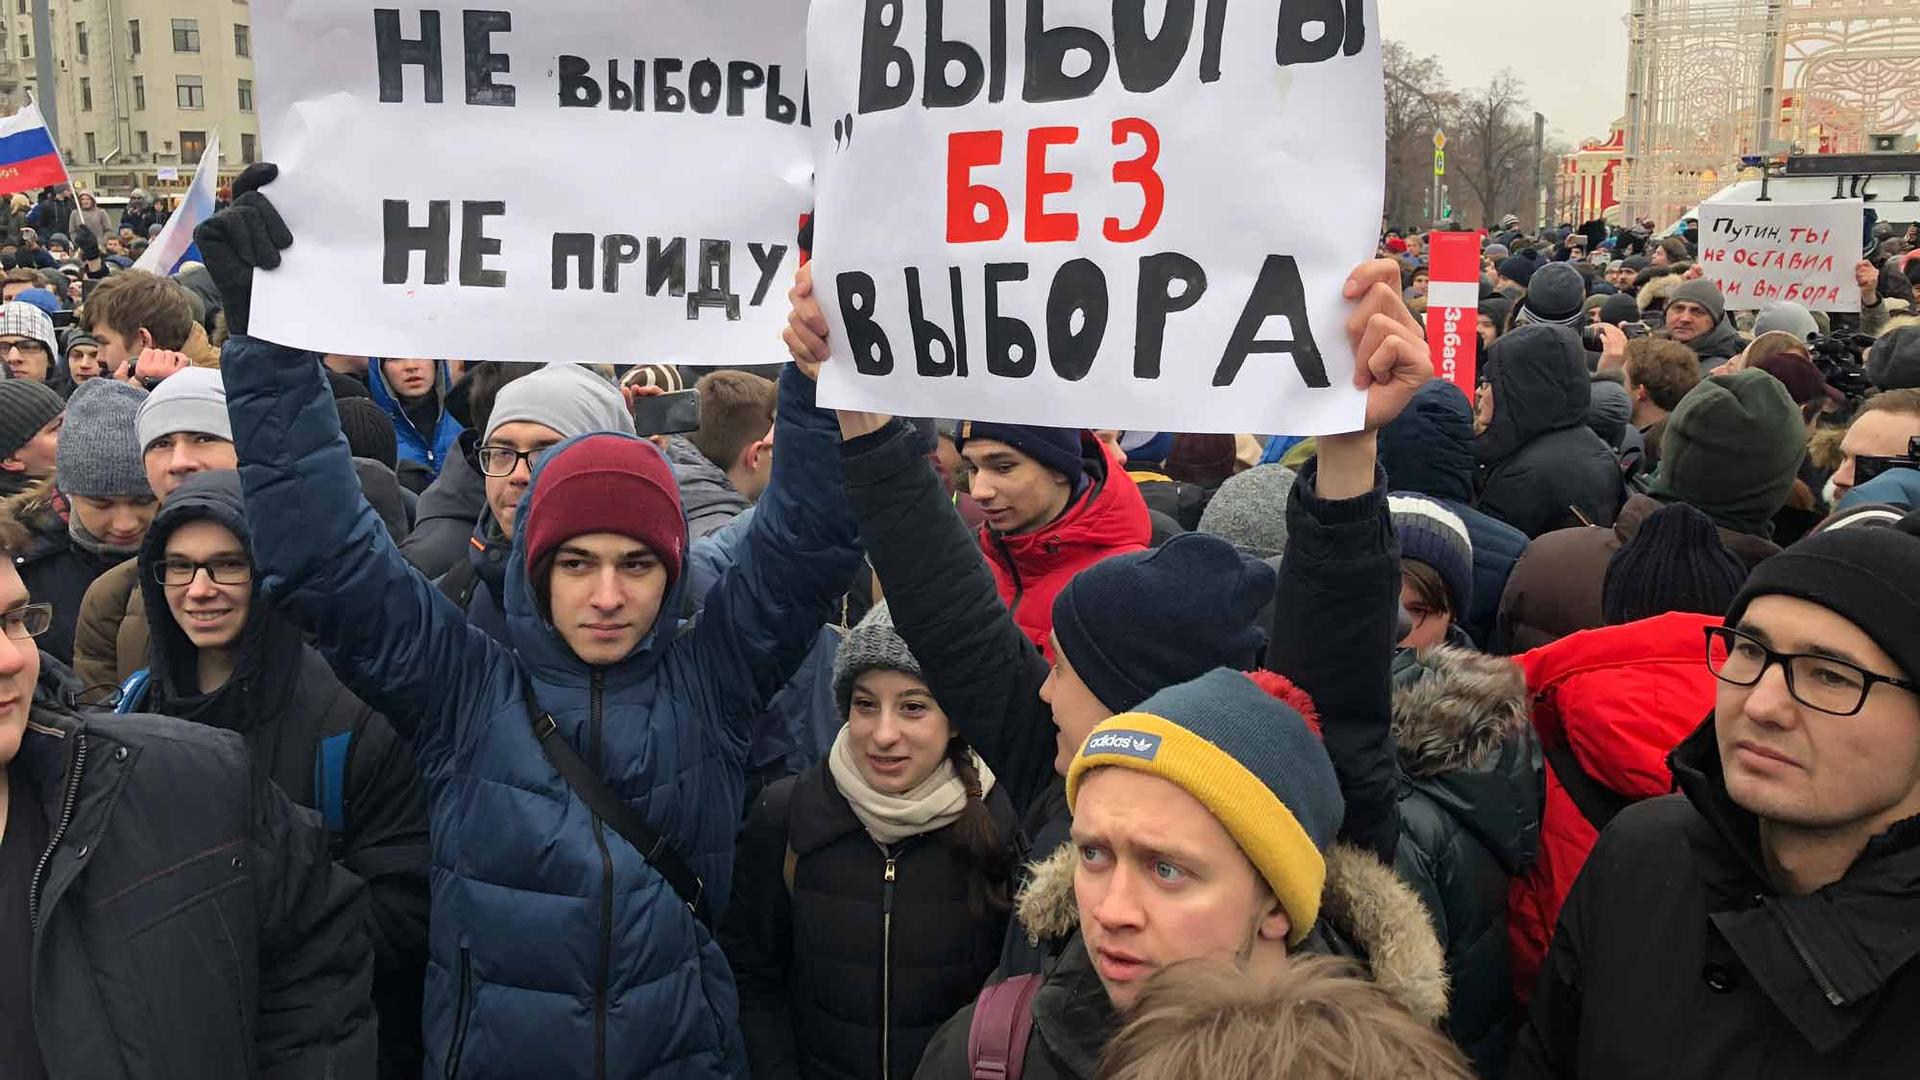 A crowd of young people are gathered. Two hold up two large signs in Russian. 